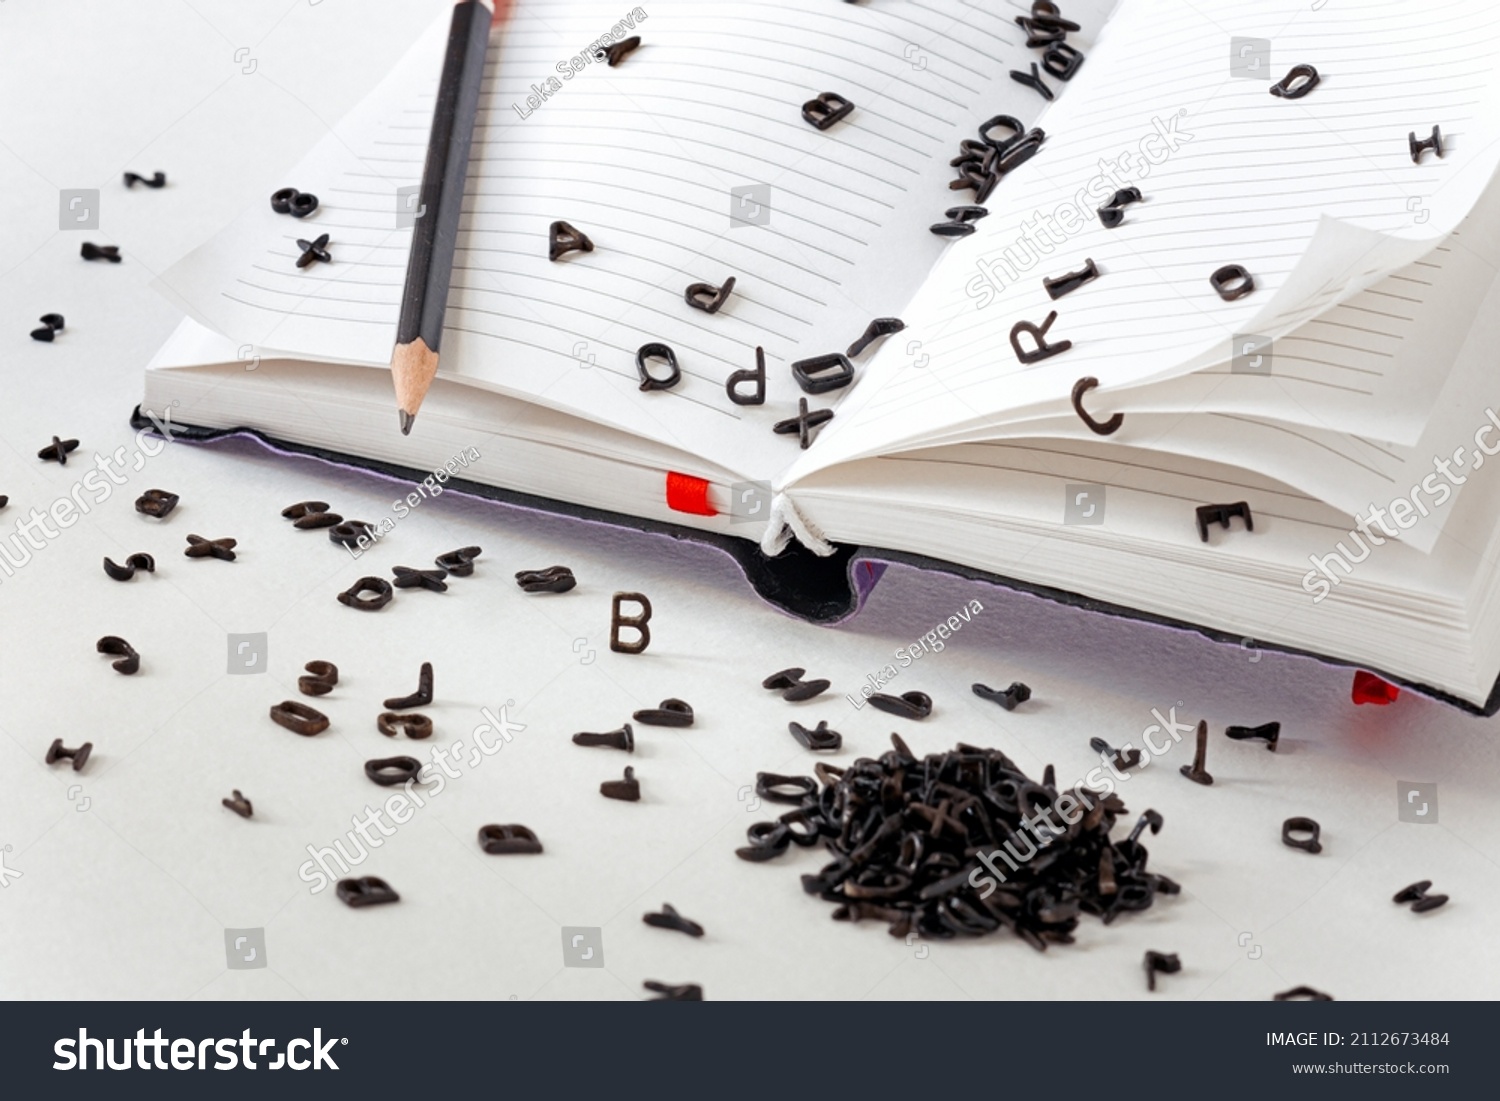 a lot of small black Latin letters scattered across the pages of a notebook and a table, the concept of grammar and spelling, creativity and ideas for a story #2112673484